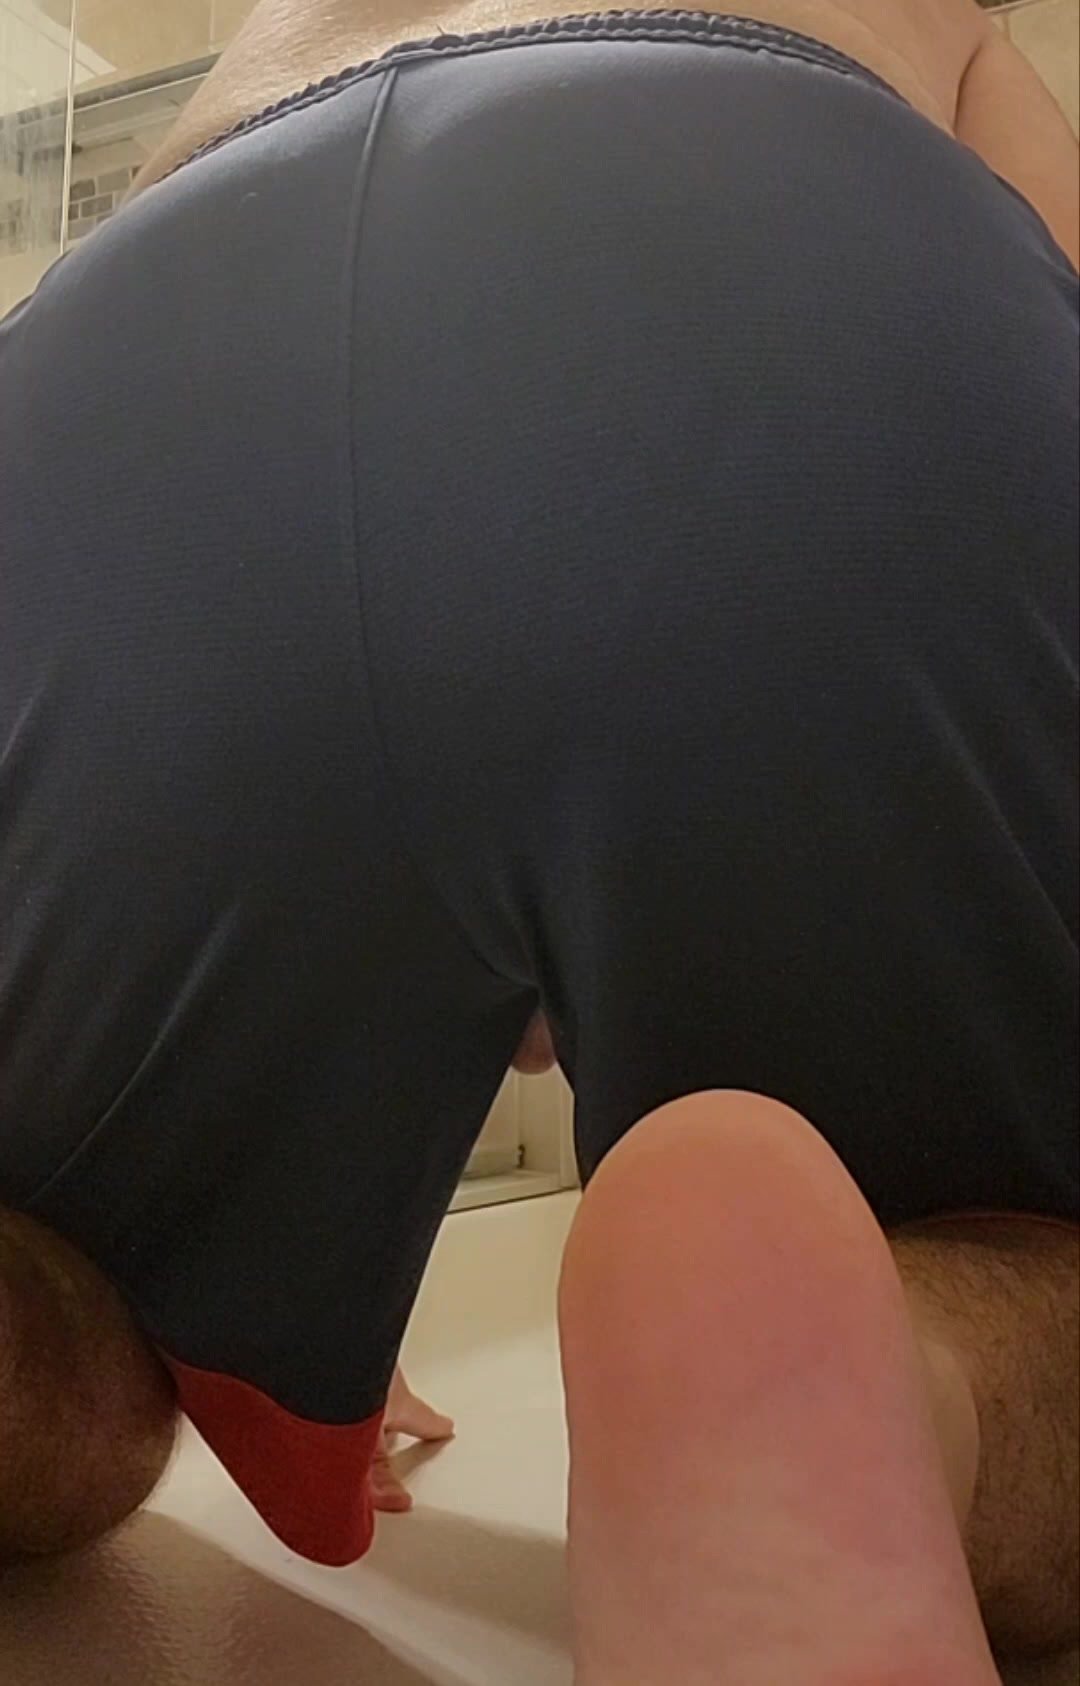 Pooping my blue and red shorts